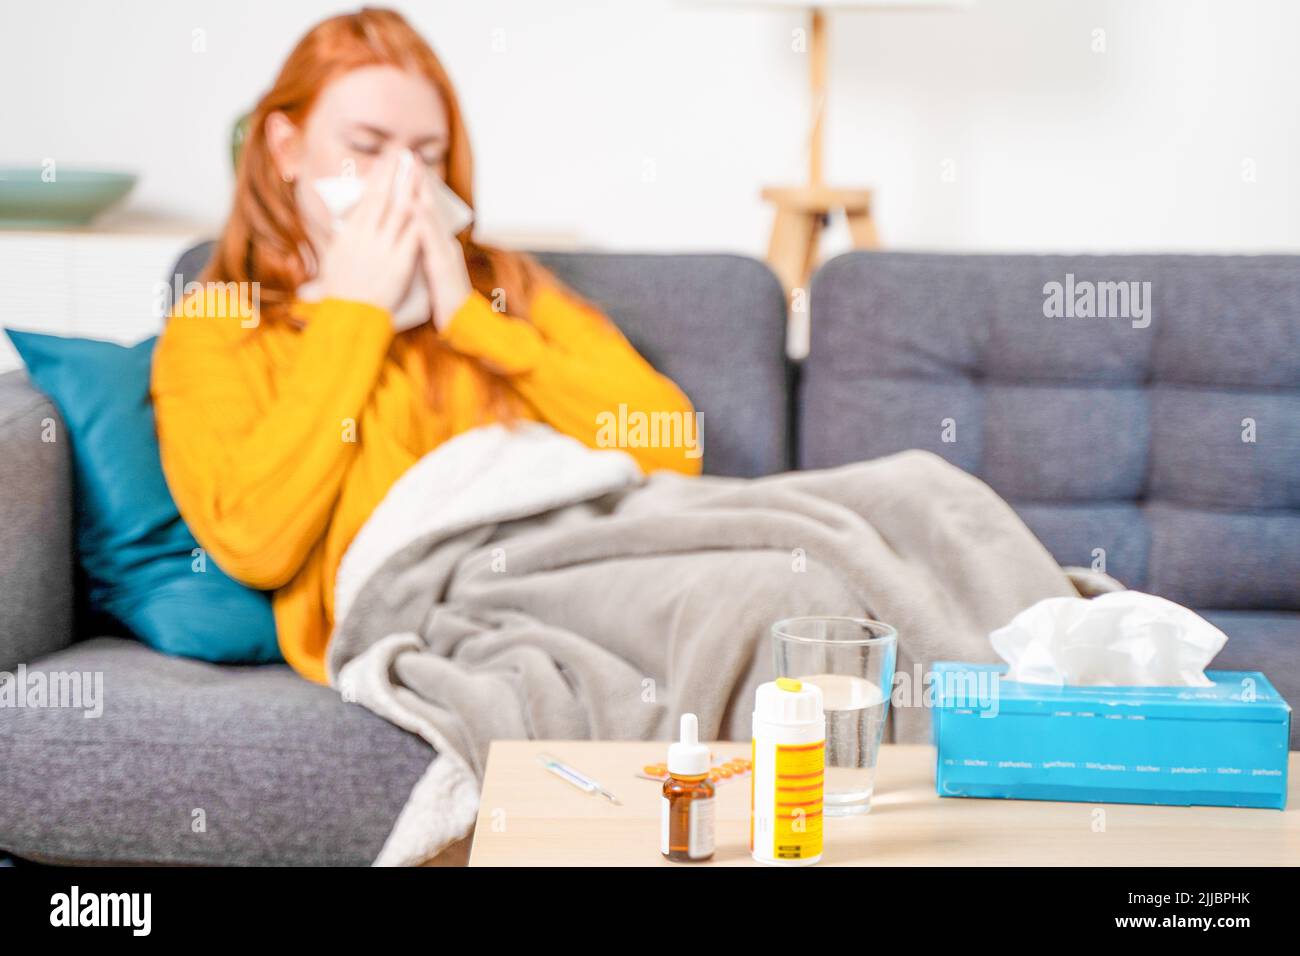 Sick woman with fever symptoms at home Stock Photo